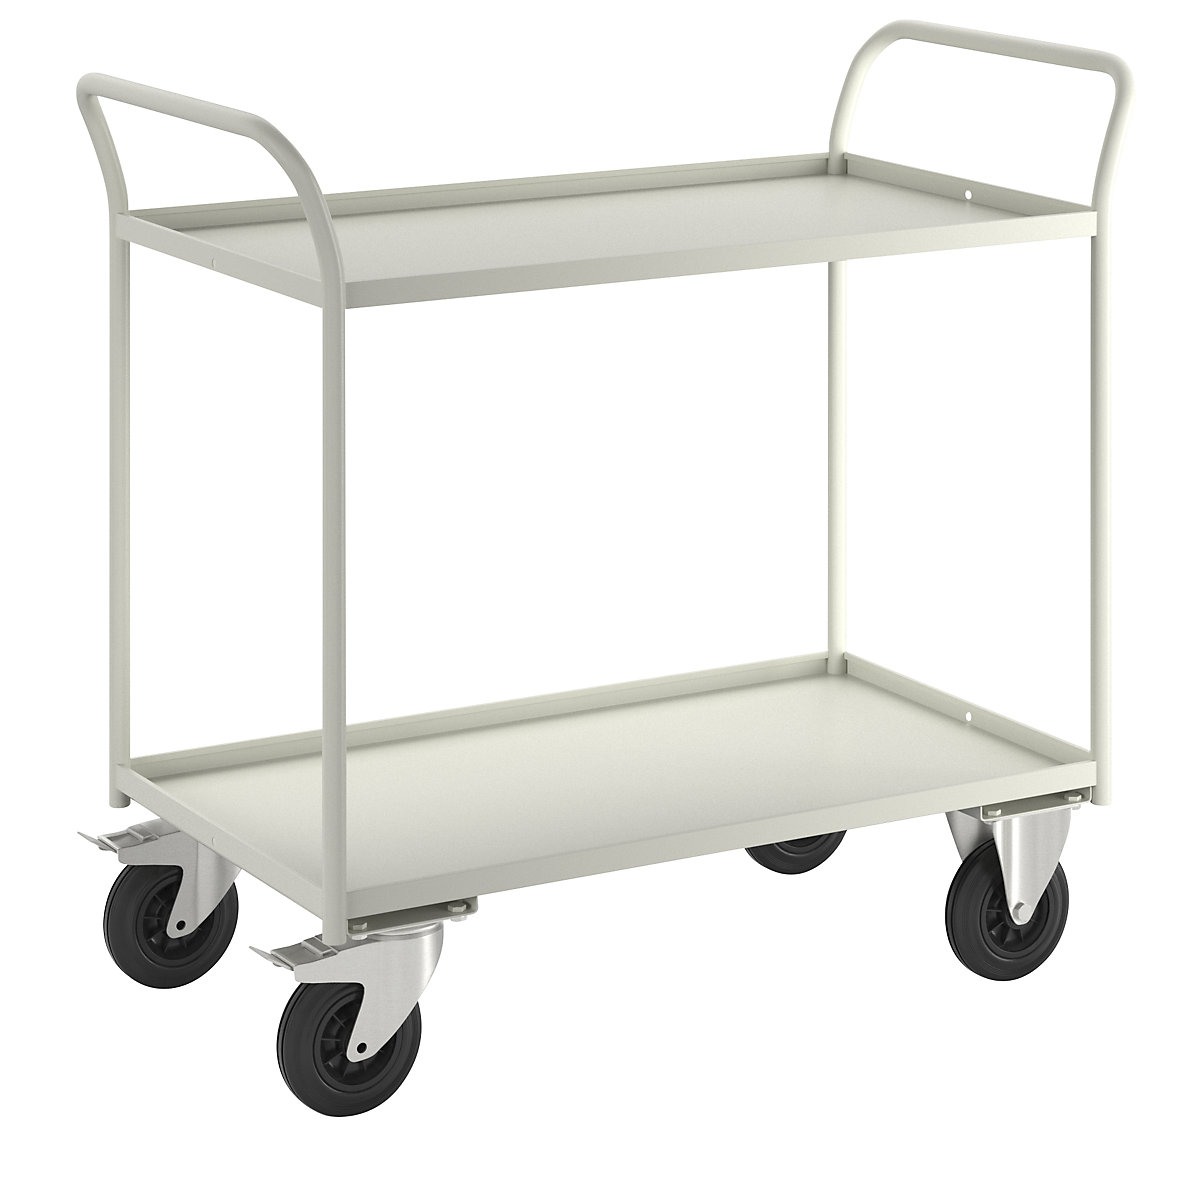 KM41 table trolley – Kongamek, 2 shelves with raised edges, LxWxH 1070 x 550 x 1000 mm, white, 2 swivel castors with stops, 2 fixed castors-7